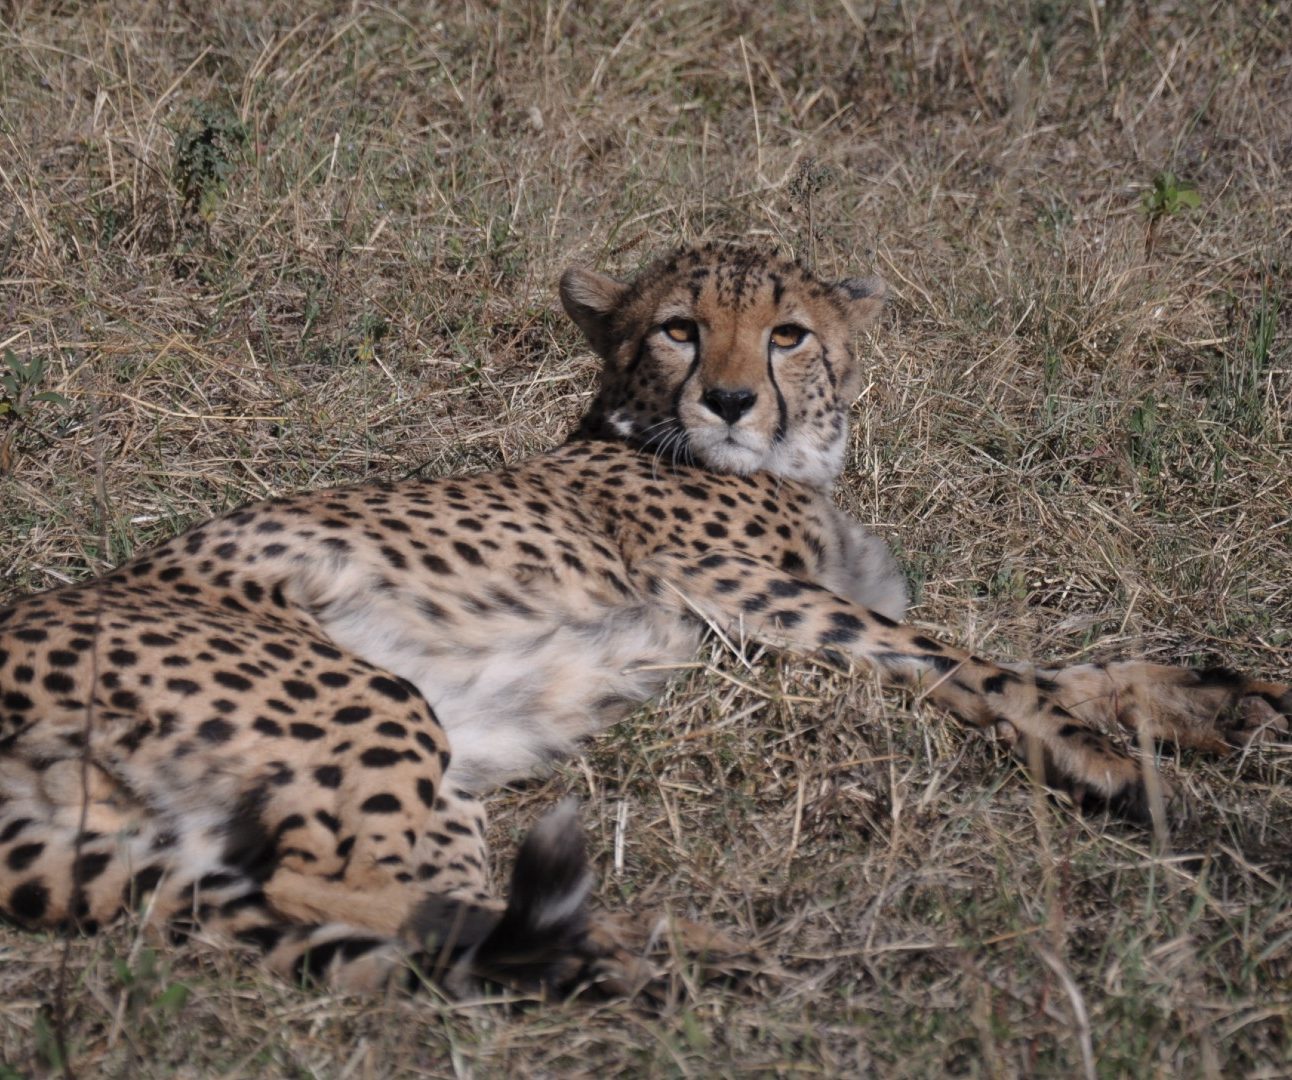 An adult cheetah lying on the grass looking relaxed.